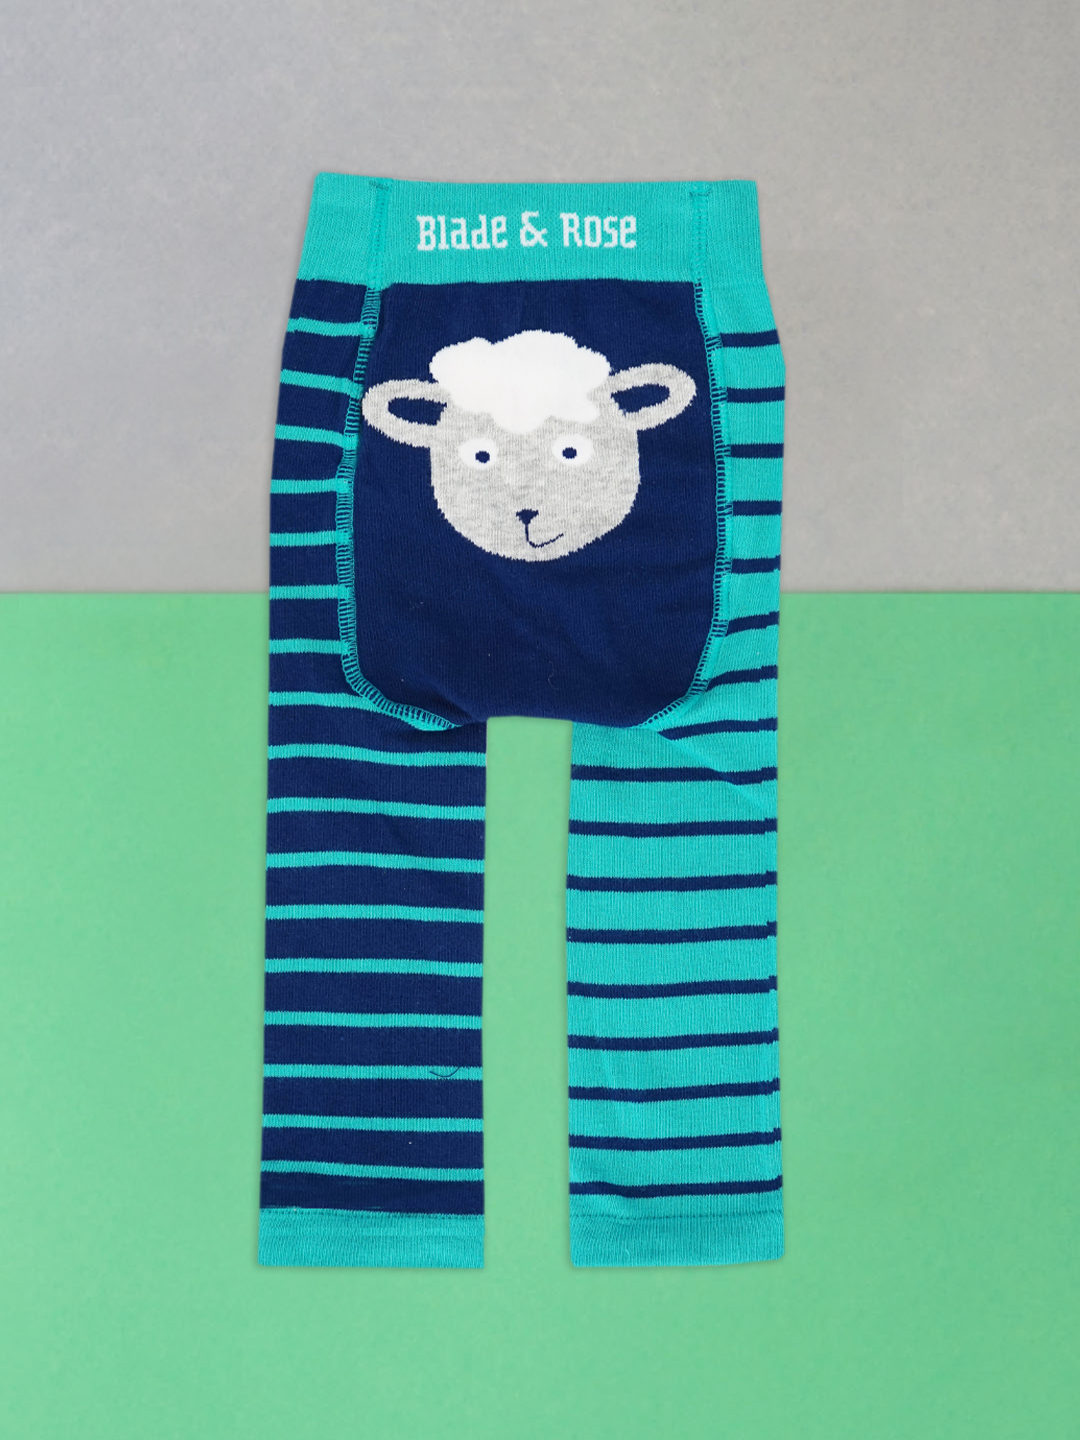 Blade & Rose Bright Sheep Leggings — The Northern Line